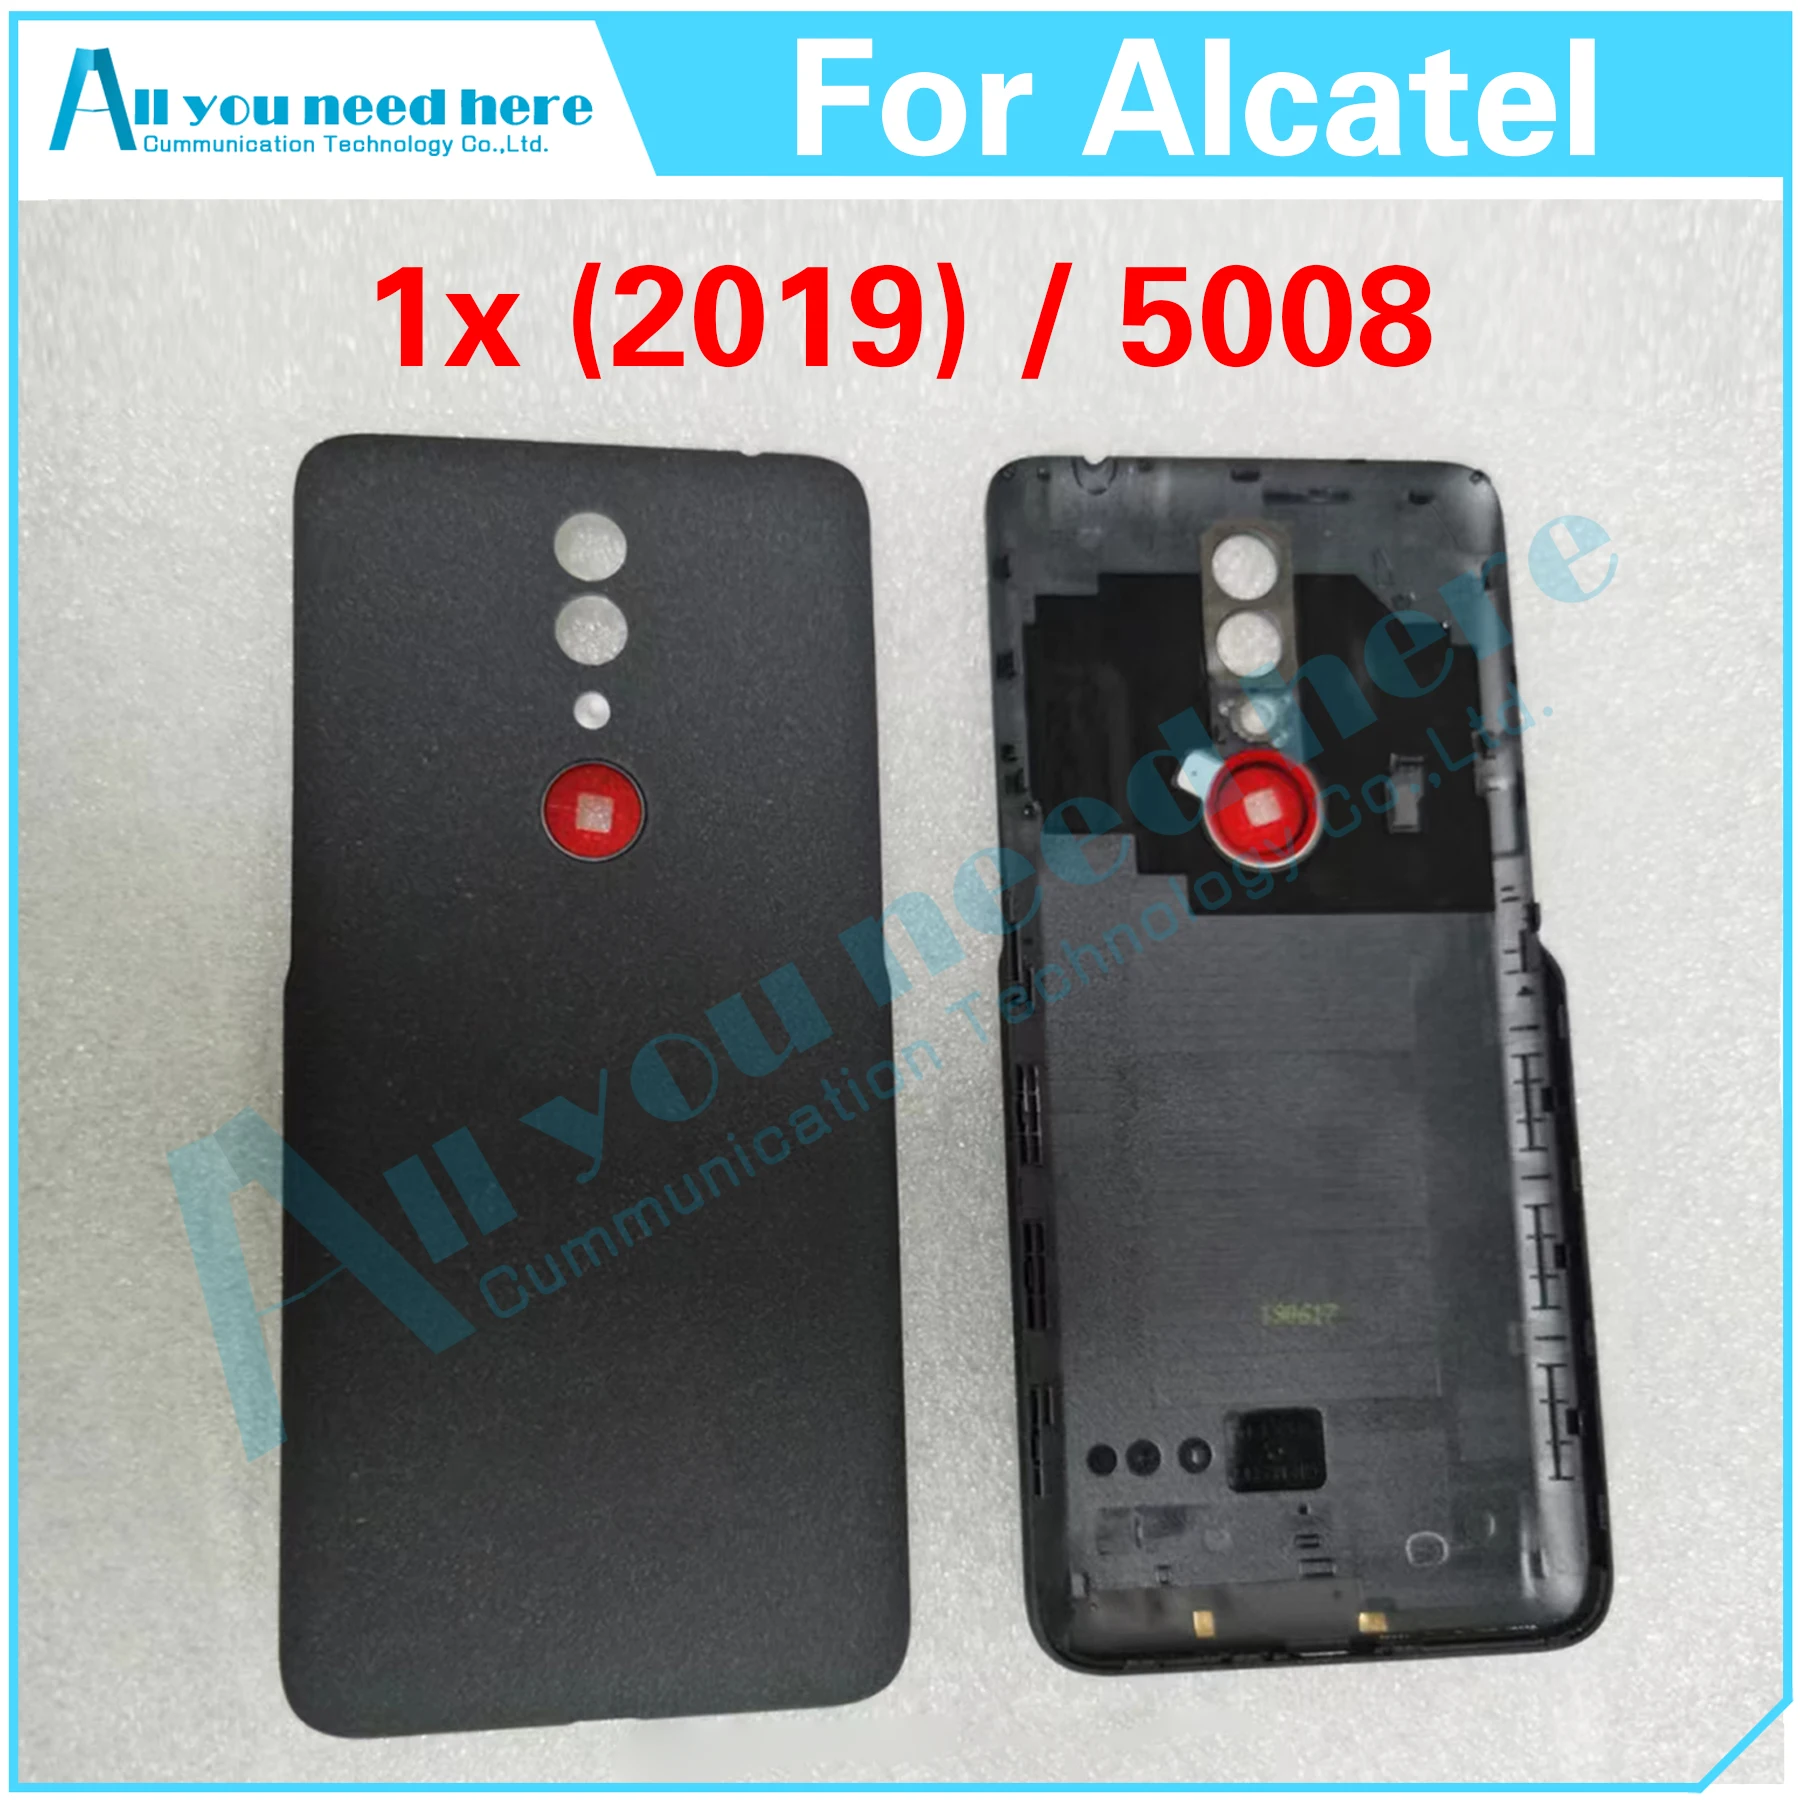 

High Quality For Alcatel 1X (2019) 5008 Back Cover Door Housing Case Rear Battery Cover Repair Parts Replacement